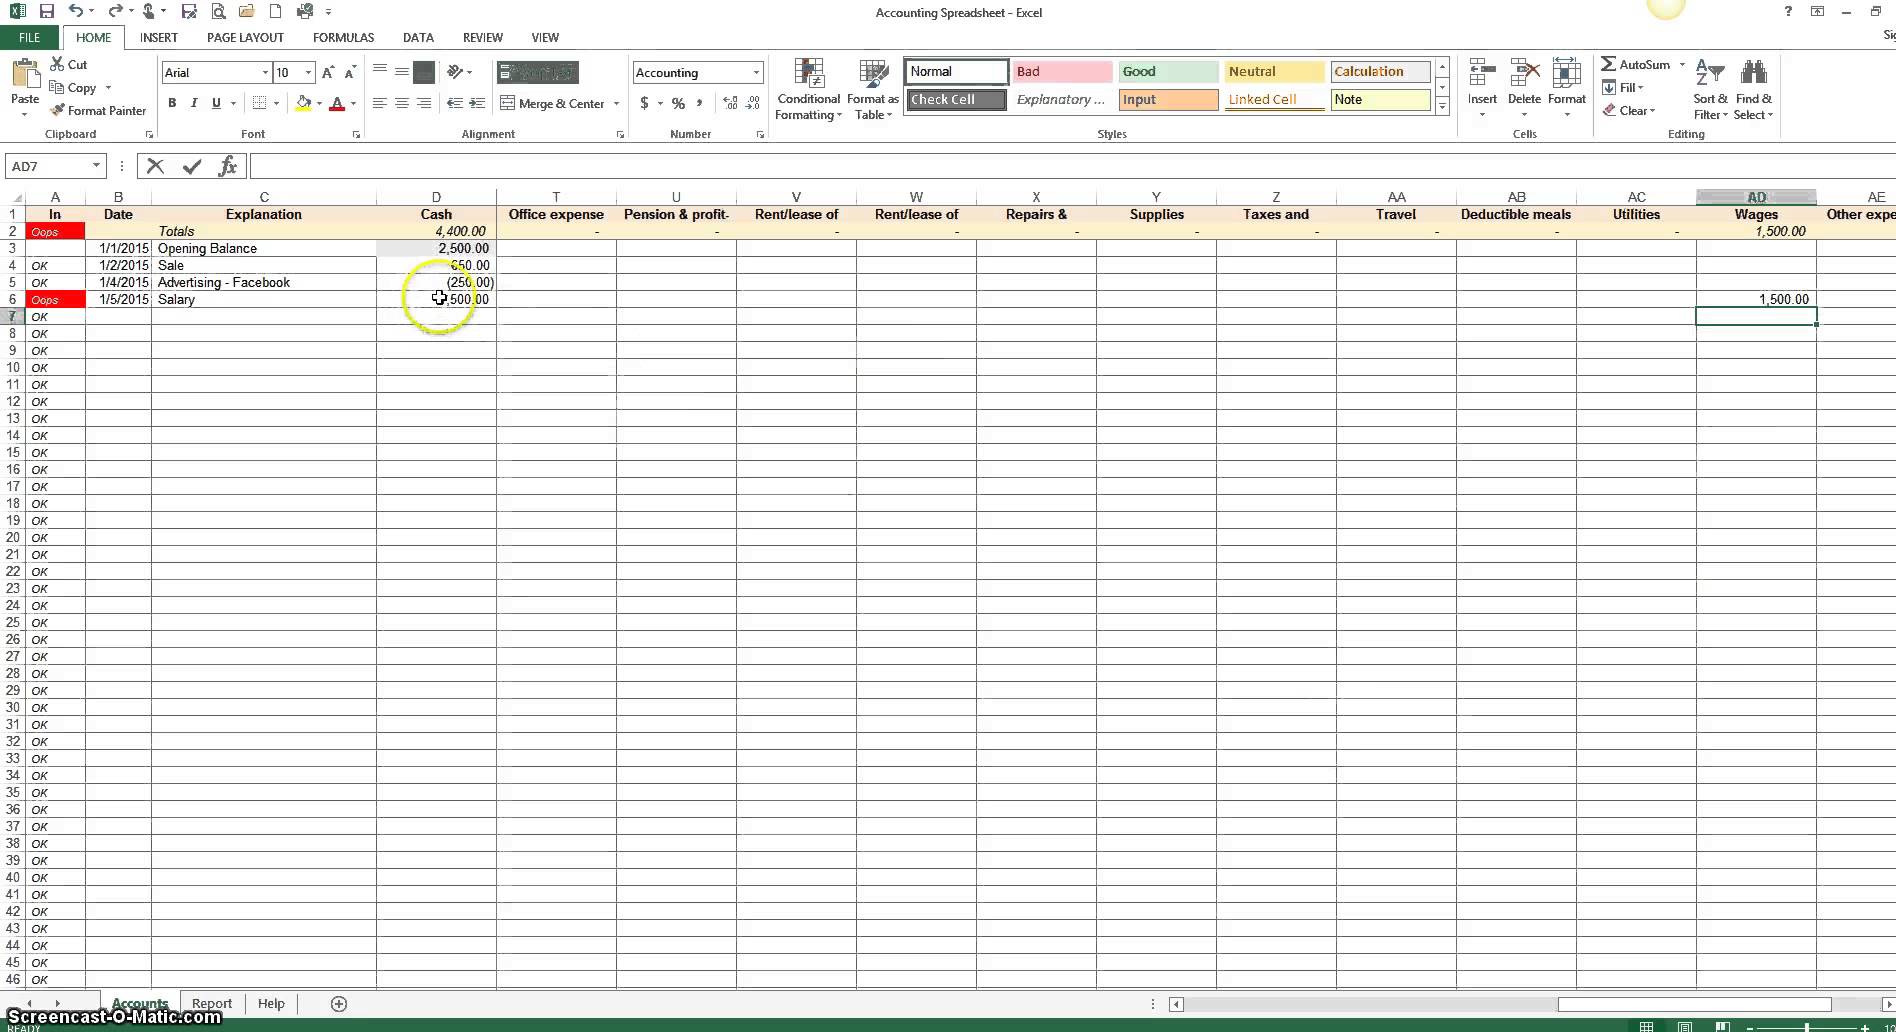 Accounting Spreadsheet Example 1